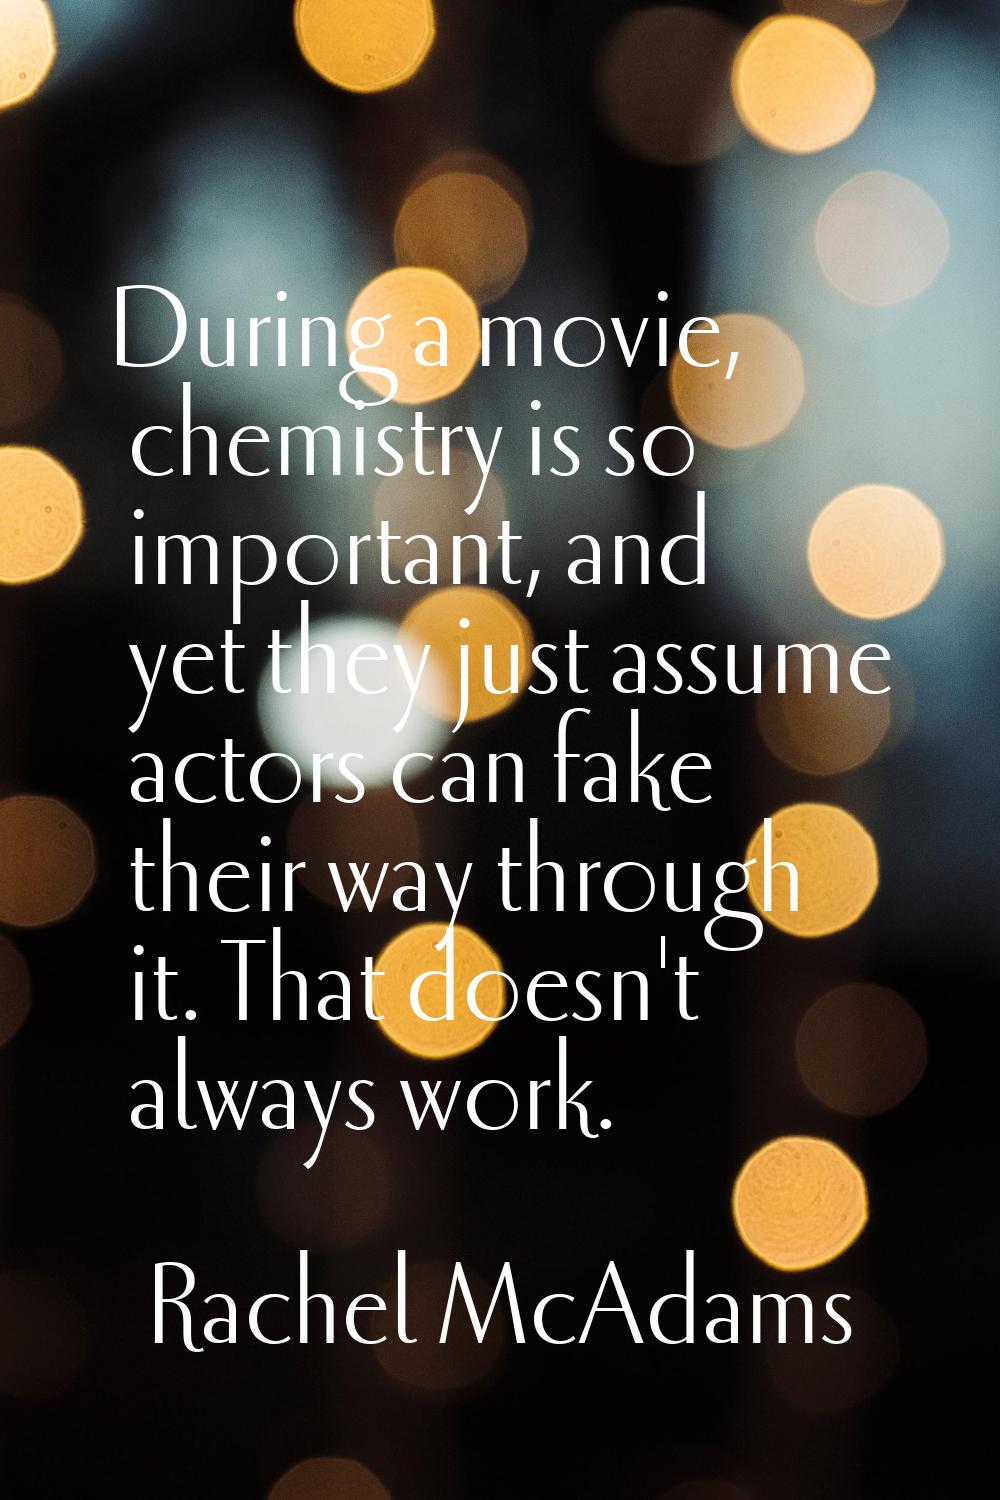 During a movie, chemistry is so important, and yet they just assume actors can fake their way throu